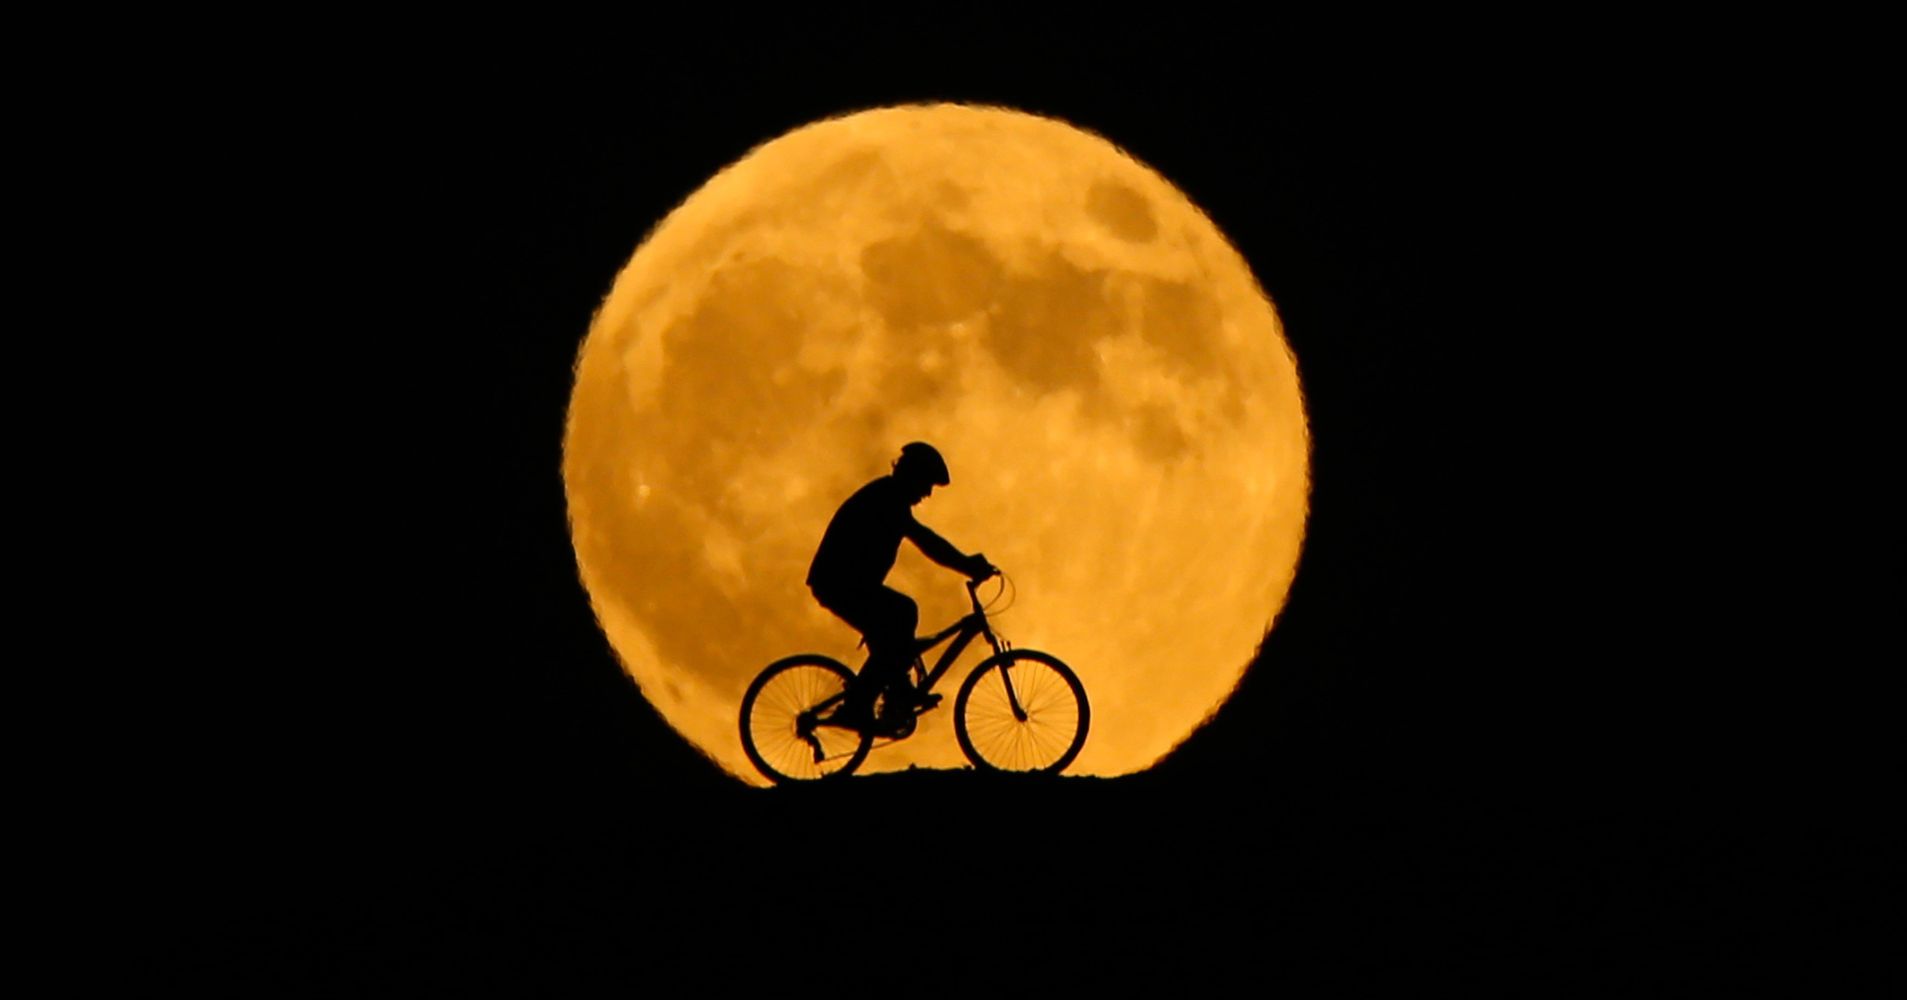 33 Spectacular Photos Of The Longest Full ‘Blood Moon’ Of The Century ...